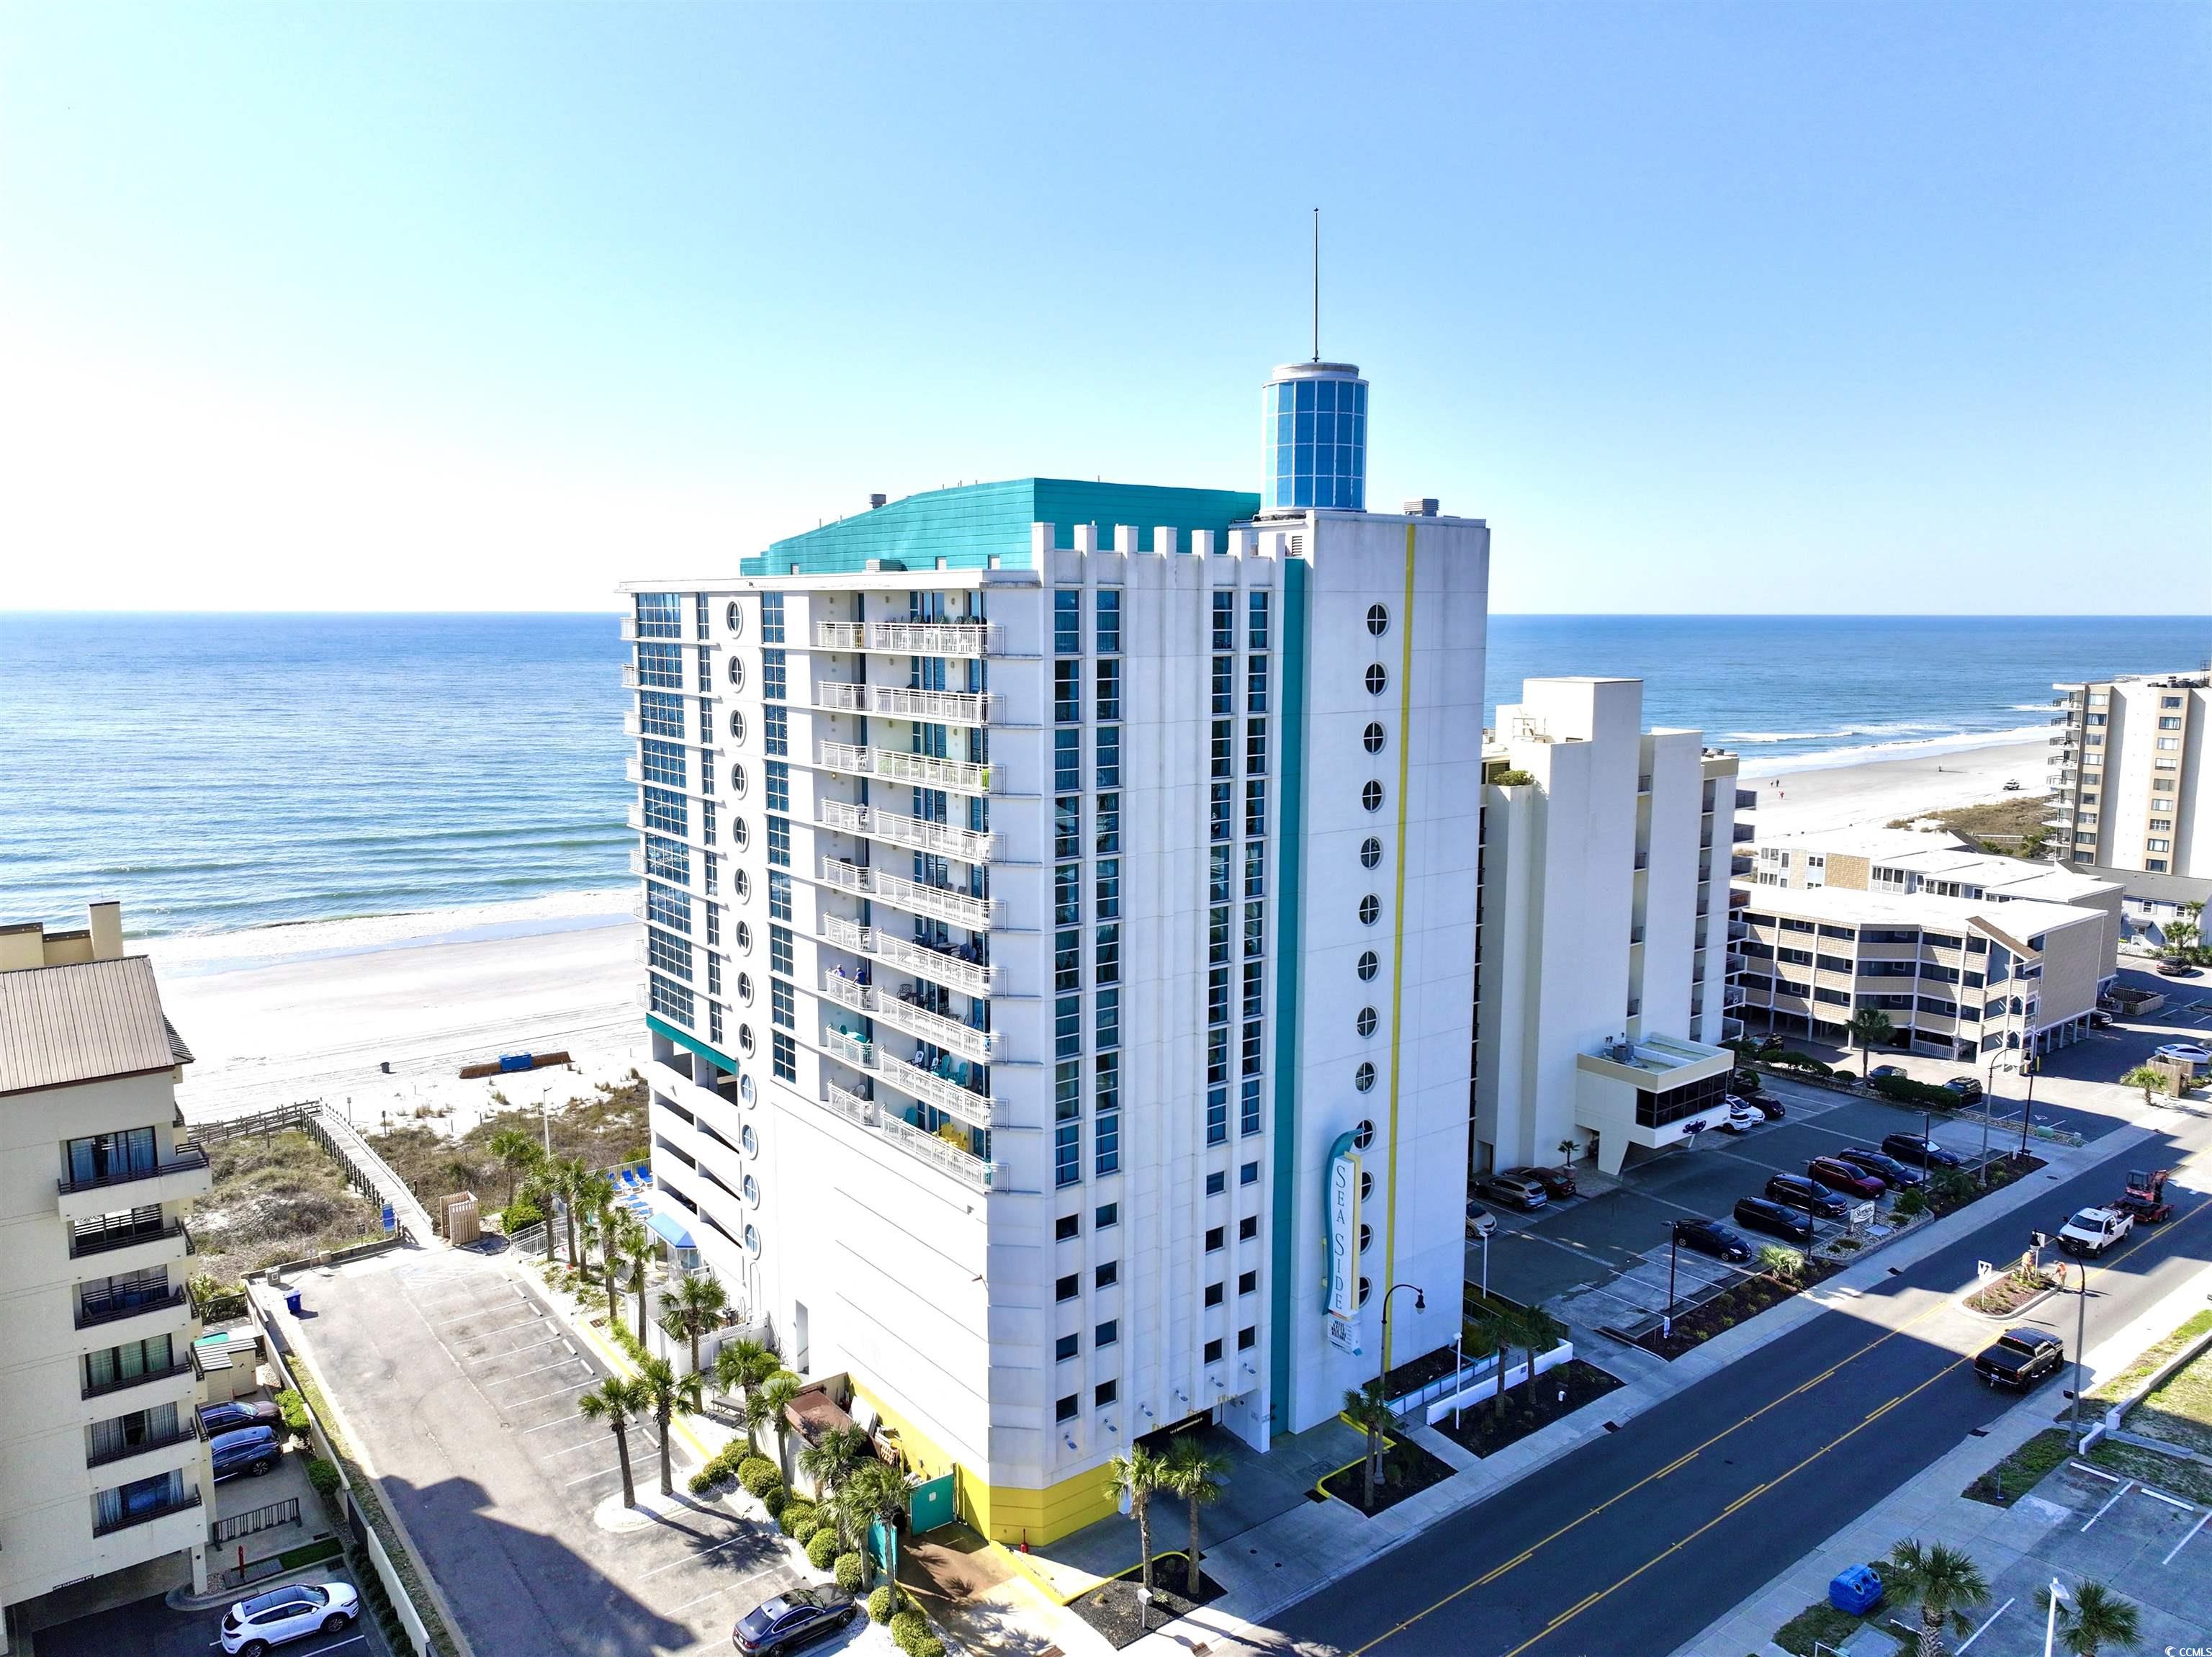 discover the epitome of beachside living in unit 901 at seaside, nestled in the heart of north myrtle beach. this exquisite, fully furnished 3-bedroom, 2-bathroom condo offers breathtaking ocean views from the comfort of your living room and bedroom balcony. designed for those who appreciate the finer details, this end unit shines with tile floors, elegant granite countertops, and a convenient breakfast bar, all bathed in abundant natural light thanks to windows in every room. its unique position not only provides stunning vistas but also ensures privacy and tranquility, making it a serene retreat from the bustling beach life.  seaside's community amenities are unparalleled, featuring both indoor and outdoor pools, a relaxing lazy river, a rejuvenating hot tub, and a state-of-the-art weight room. start your day in the welcoming breakfast room, and enjoy direct beach access for those sun-soaked afternoons. hoa dues cover it all - insurance, utilities, cable, internet, pest control, elevator service, covered parking, and round-the-clock security, ensuring a hassle-free lifestyle. situated minutes from barefoot landing's shopping and dining and a short drive from tanger outlets, this condo offers the ultimate in convenience and luxury. as the sole three-bedroom unit available, unit 901 represents a rare opportunity to embrace the coveted beach lifestyle in north myrtle beach. a must-see for discerning buyers seeking a blend of elegance and excitement by the sea.